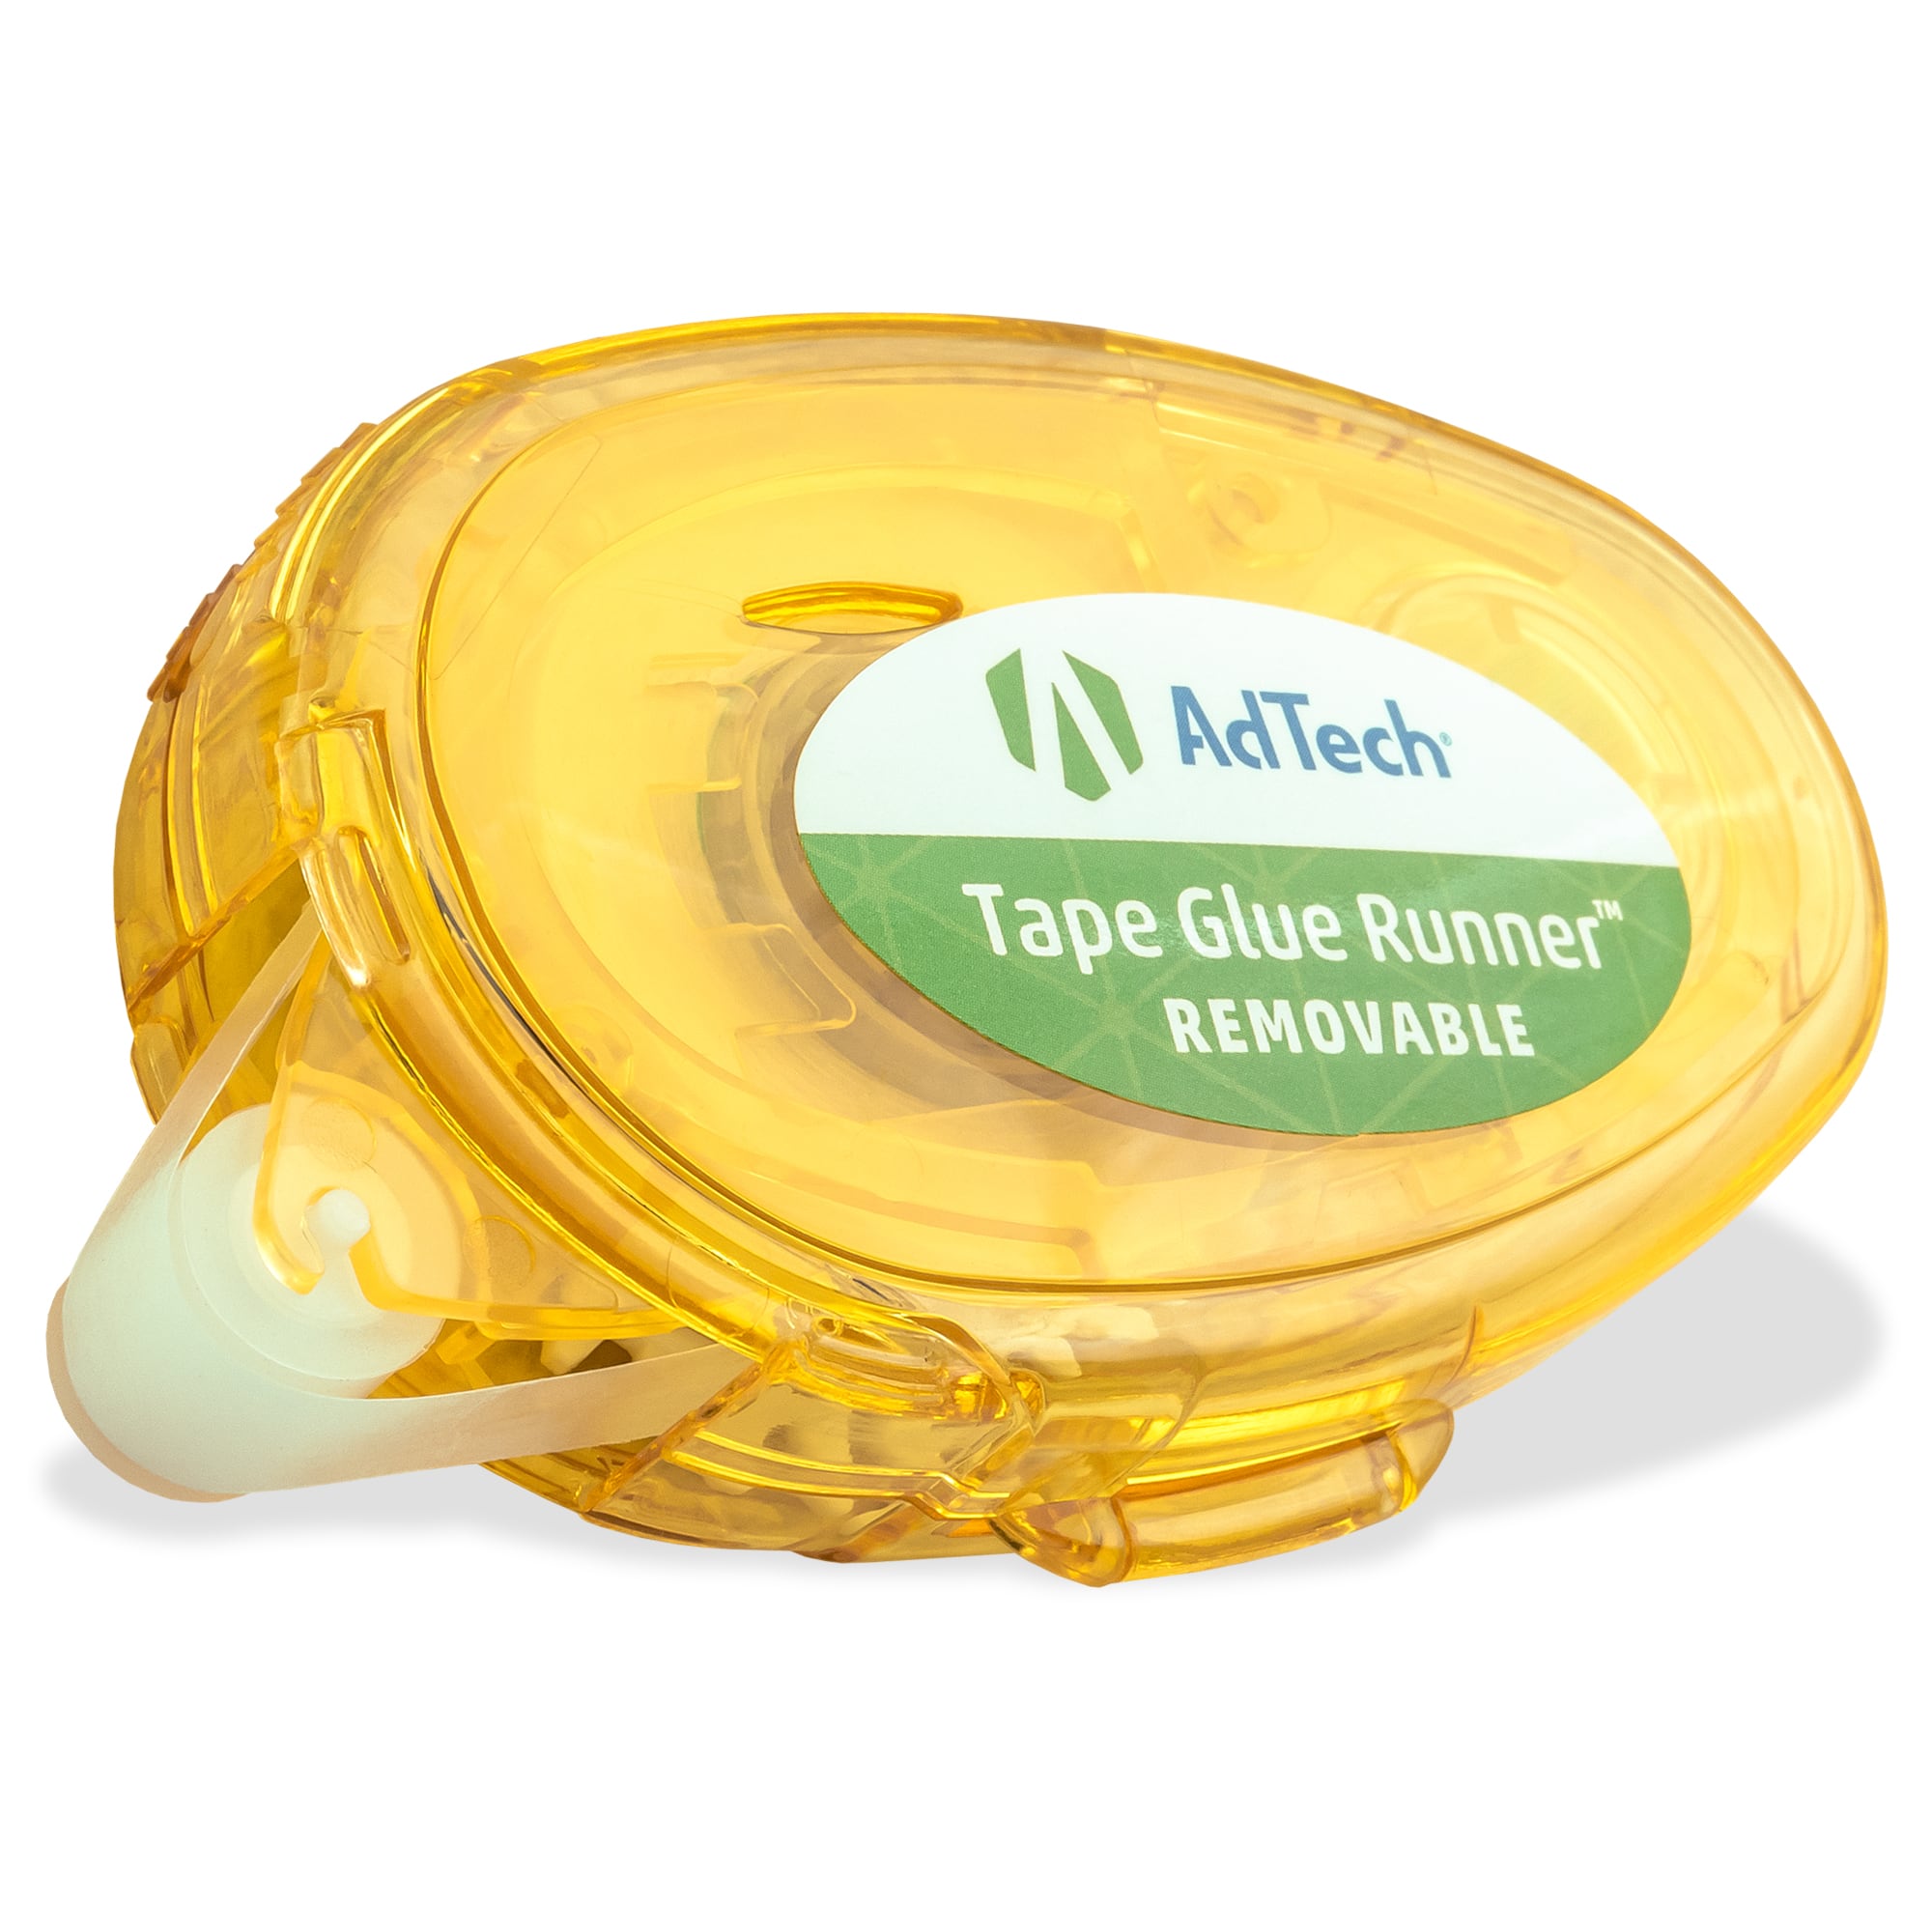 Adtech Crafter's Tape Removable Glue Runner.31 X315 for Tape